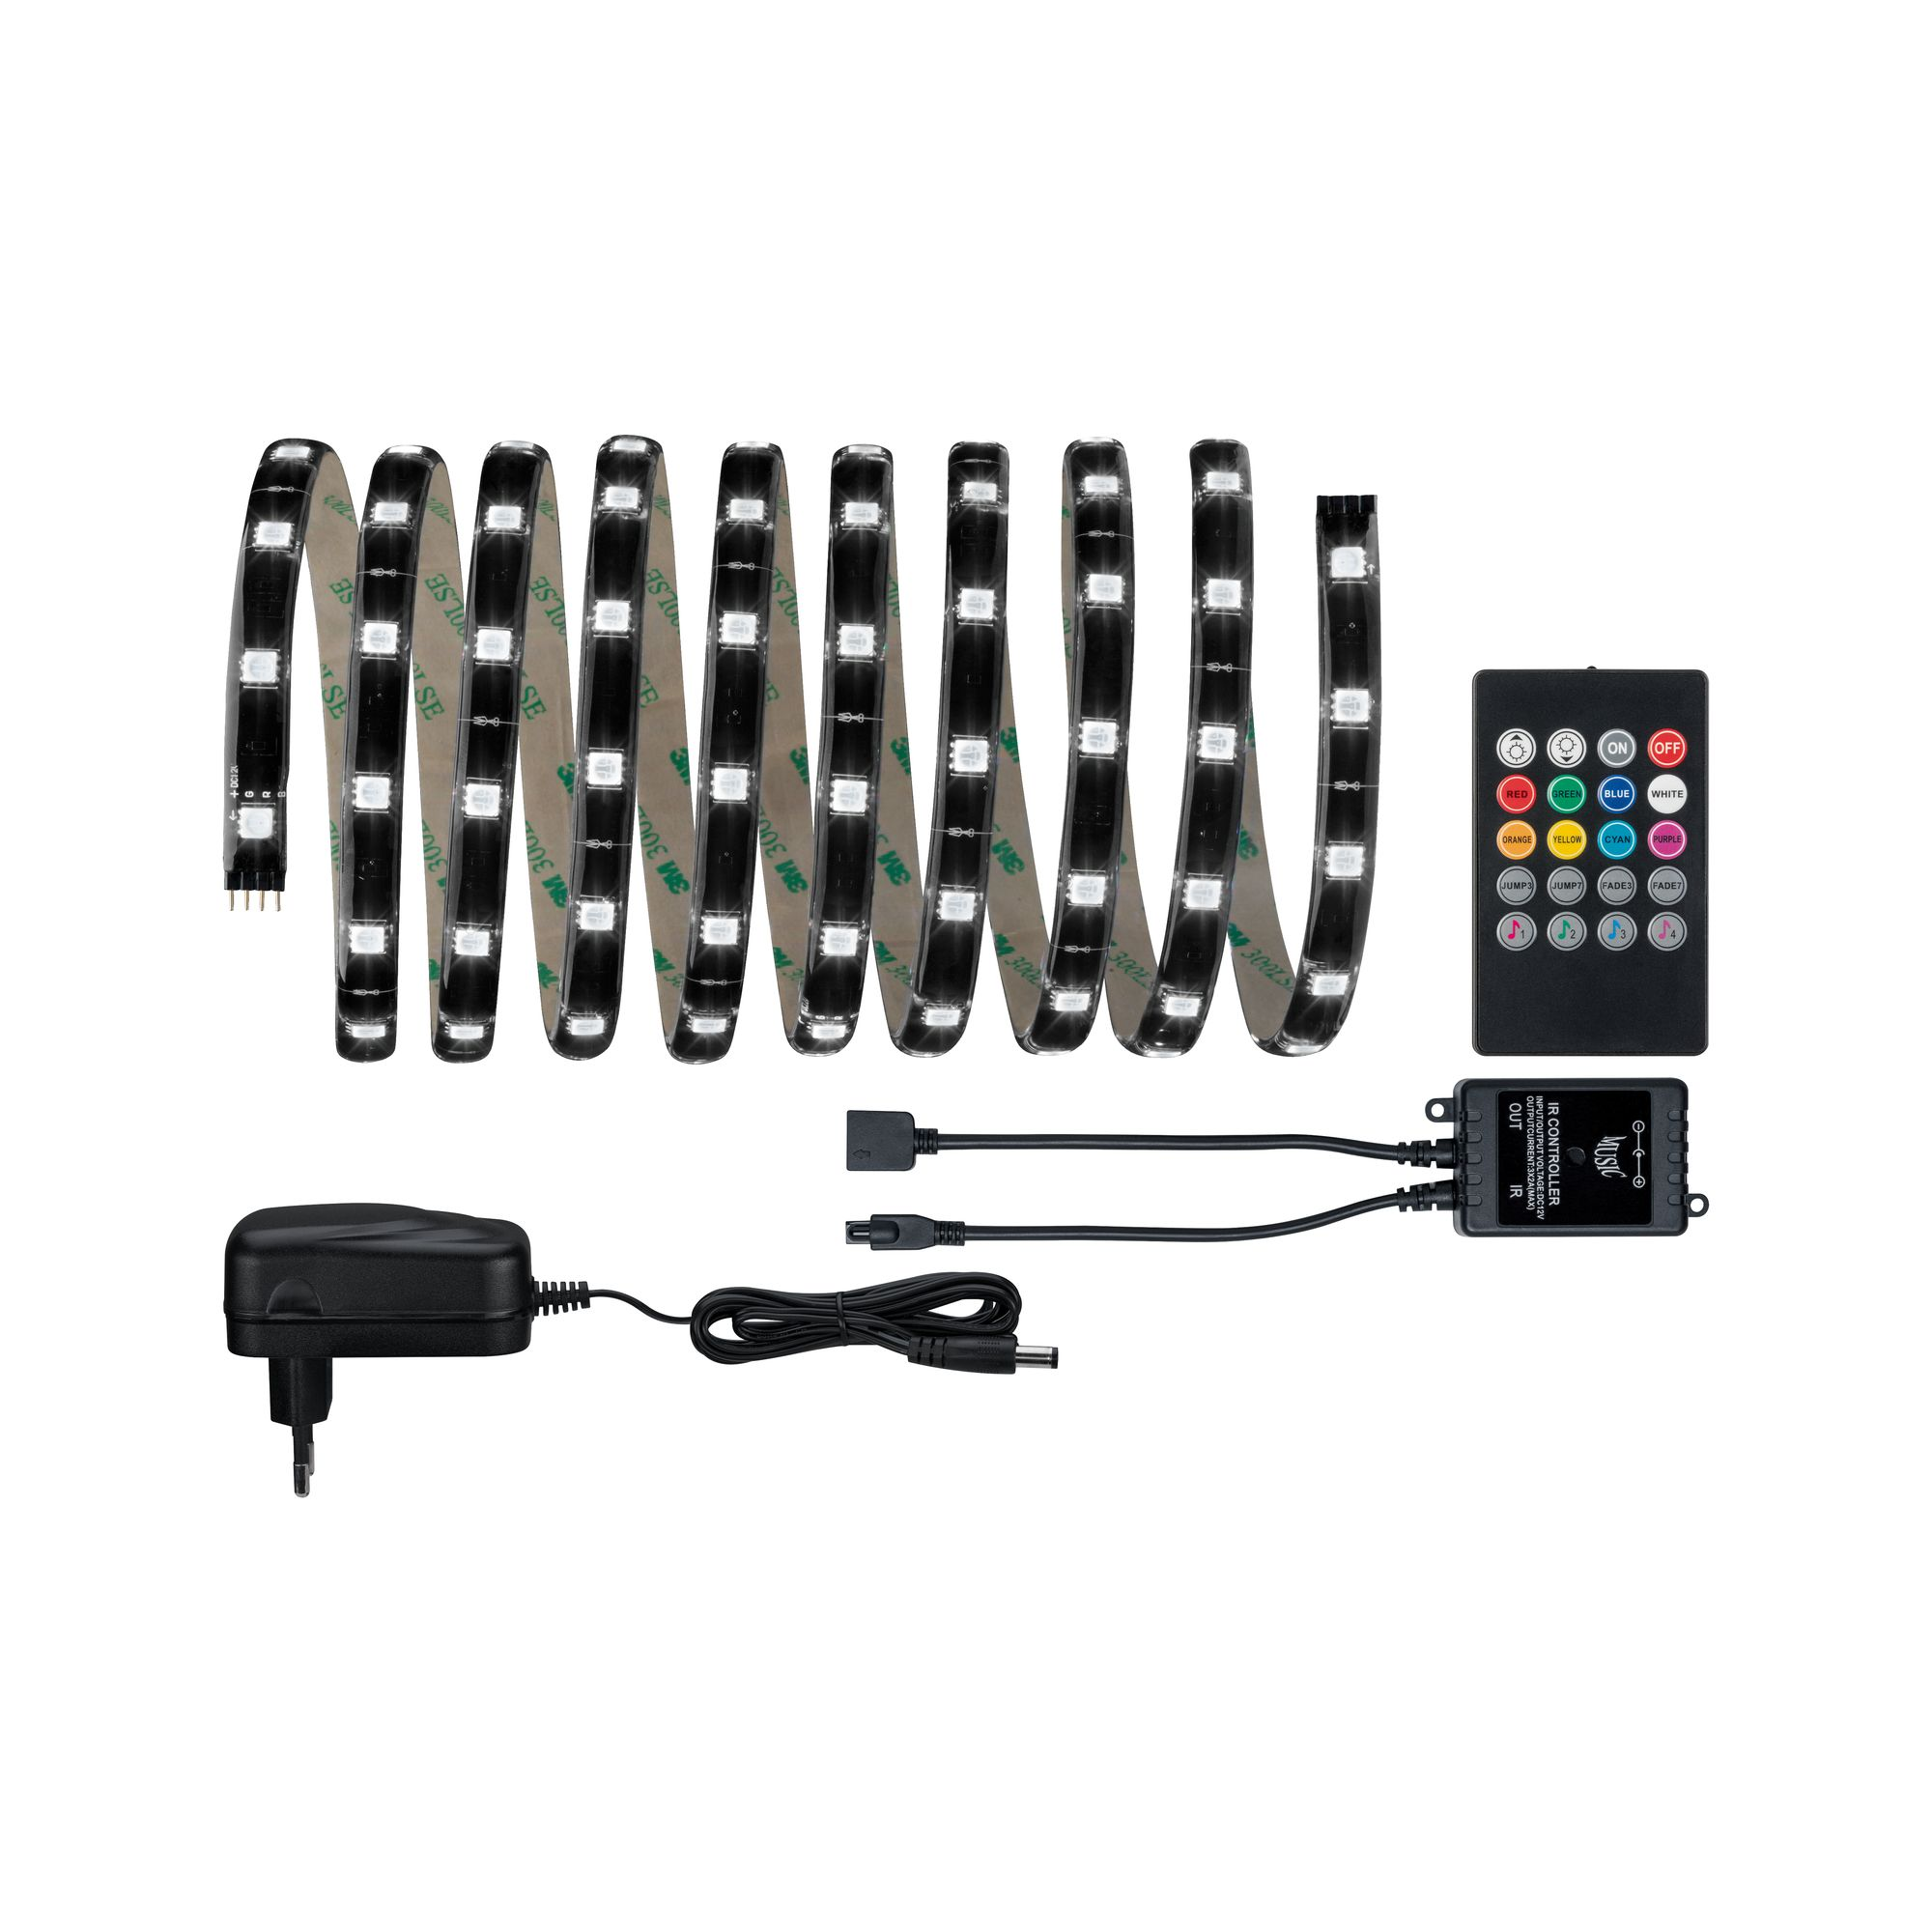 LED-Set 'YourLED Comfort' 3 m 17,8 W RGB schwarz + product picture